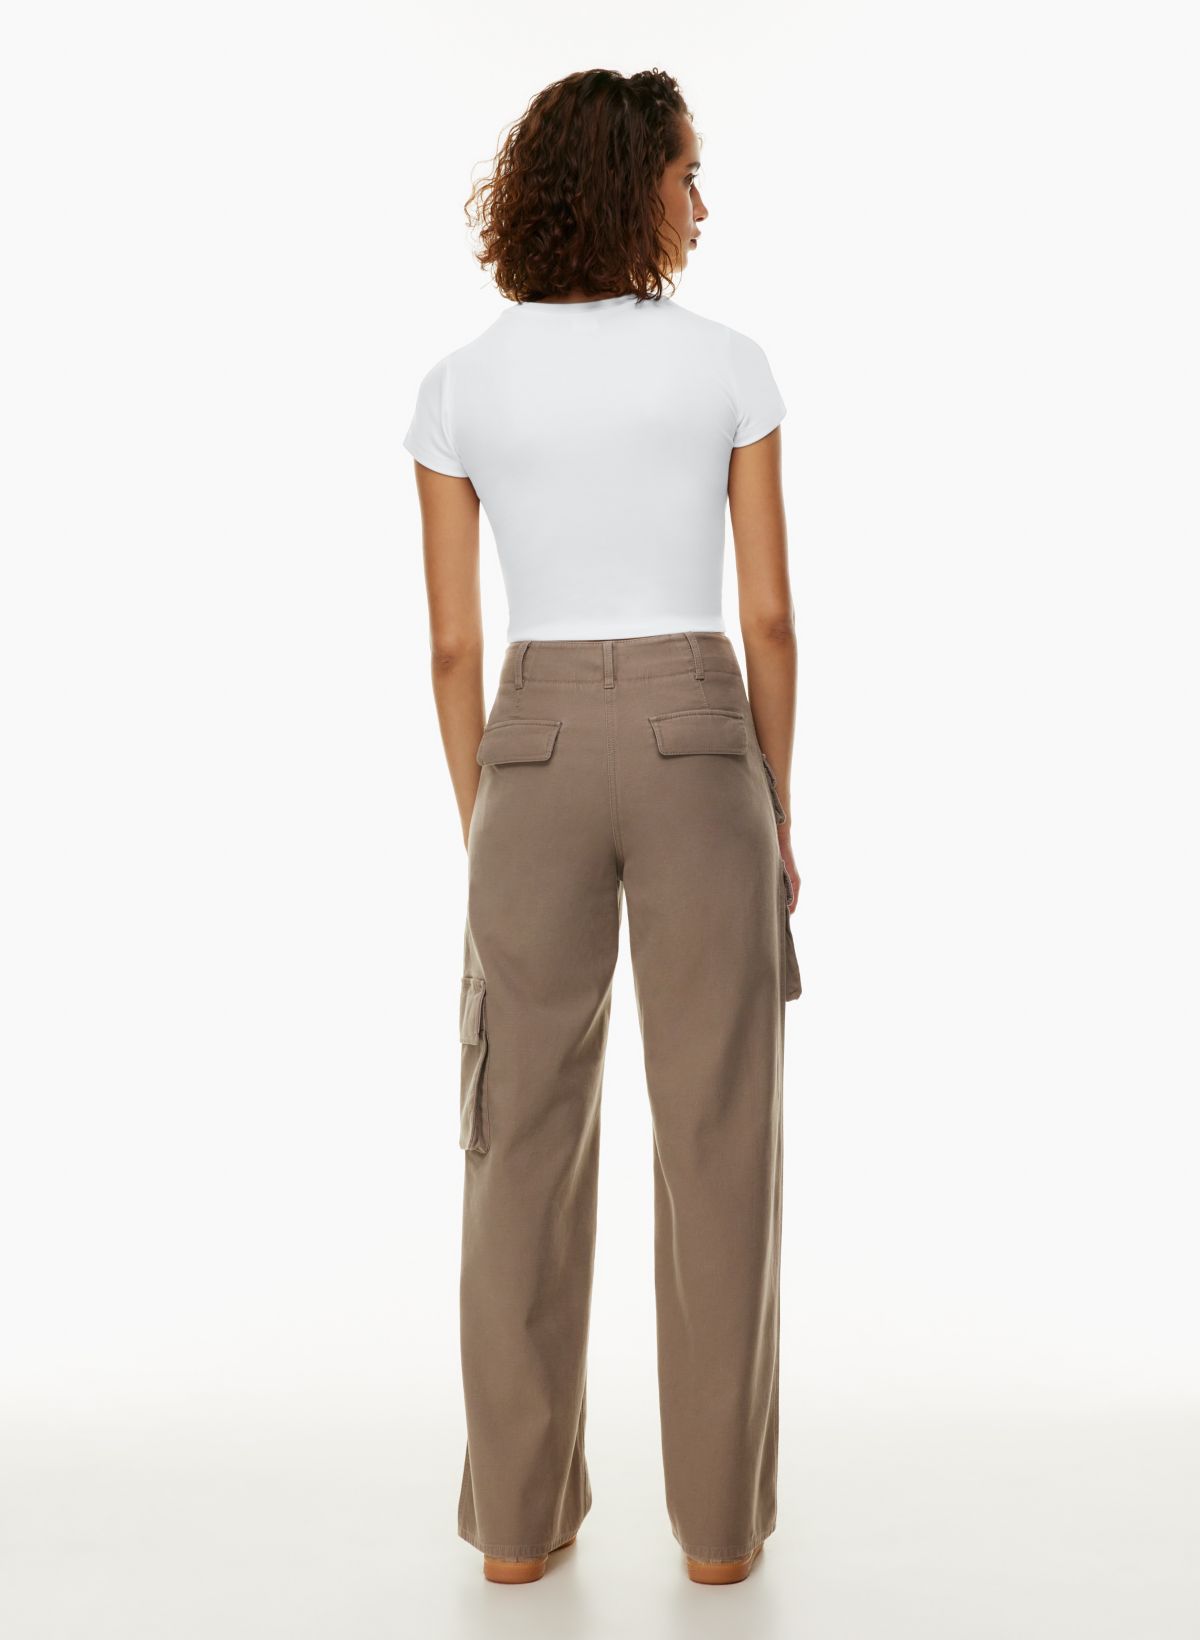 virgo VISION WIDE SHIRTS ／ EASY PANT